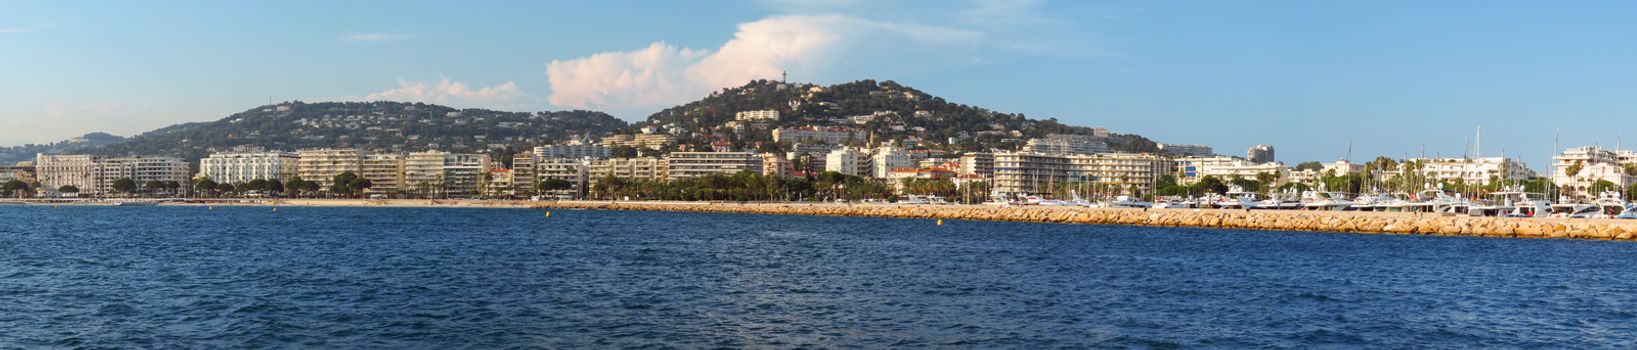 Panoramic view of the La Croisette. Cannes. France.